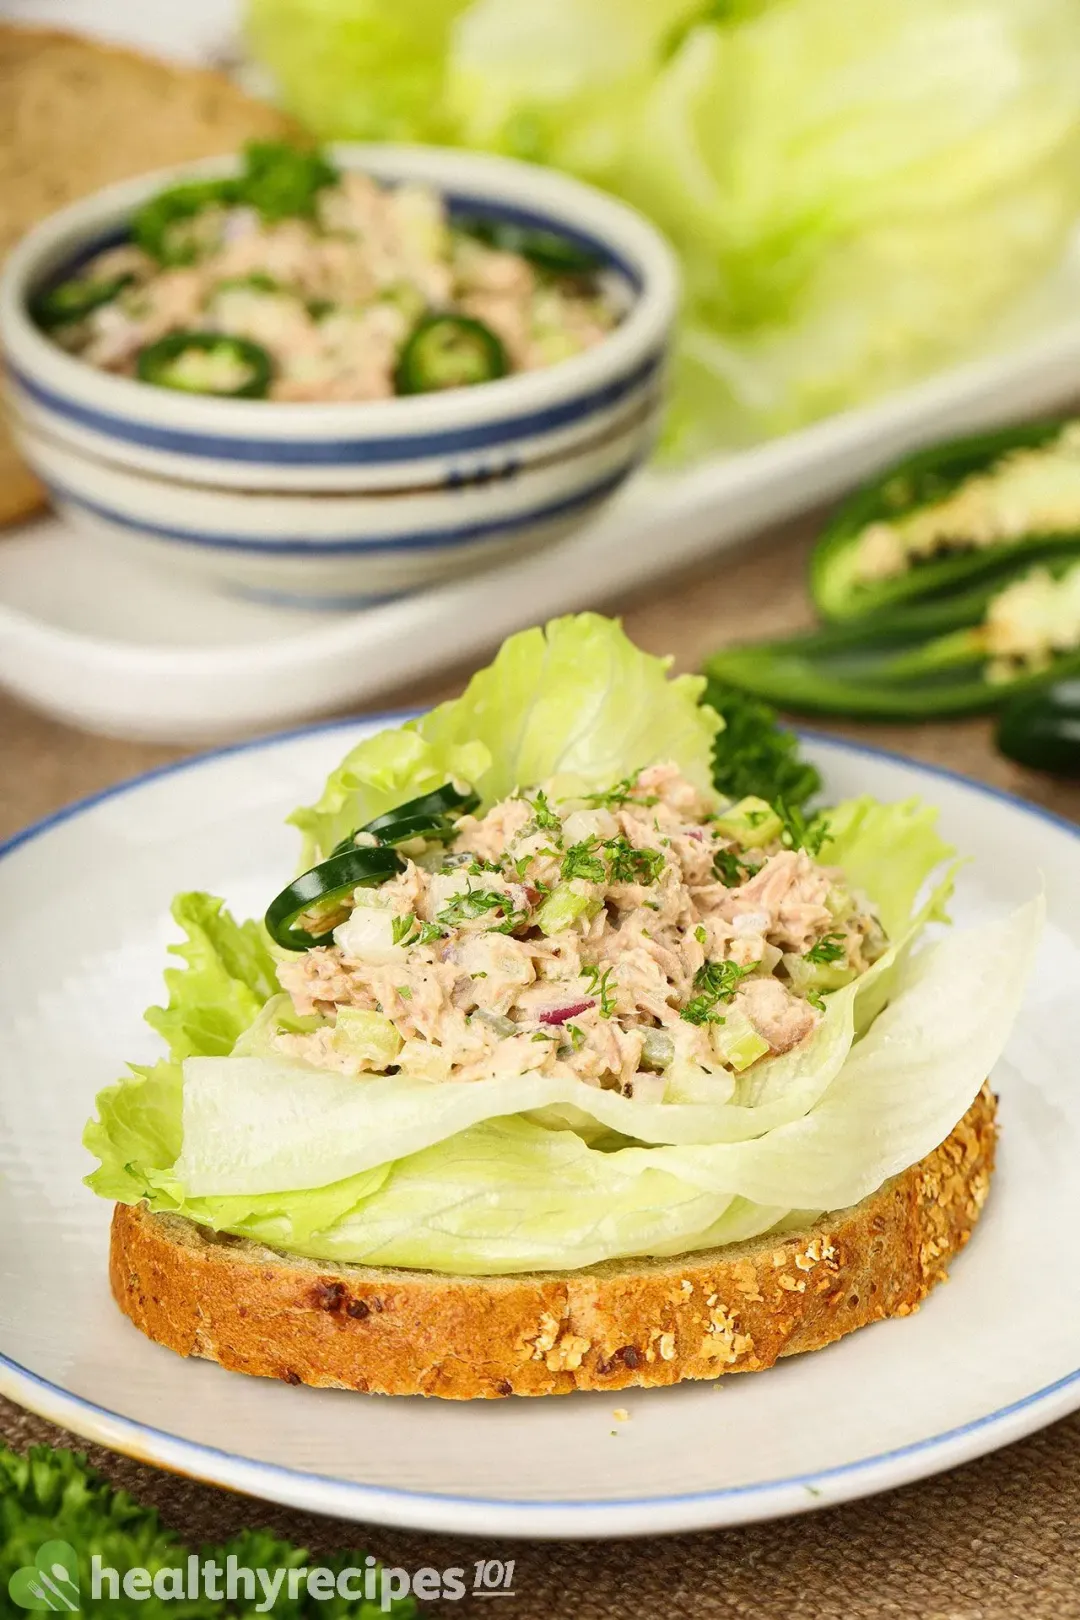 What to Serve With Classic Tuna Salad